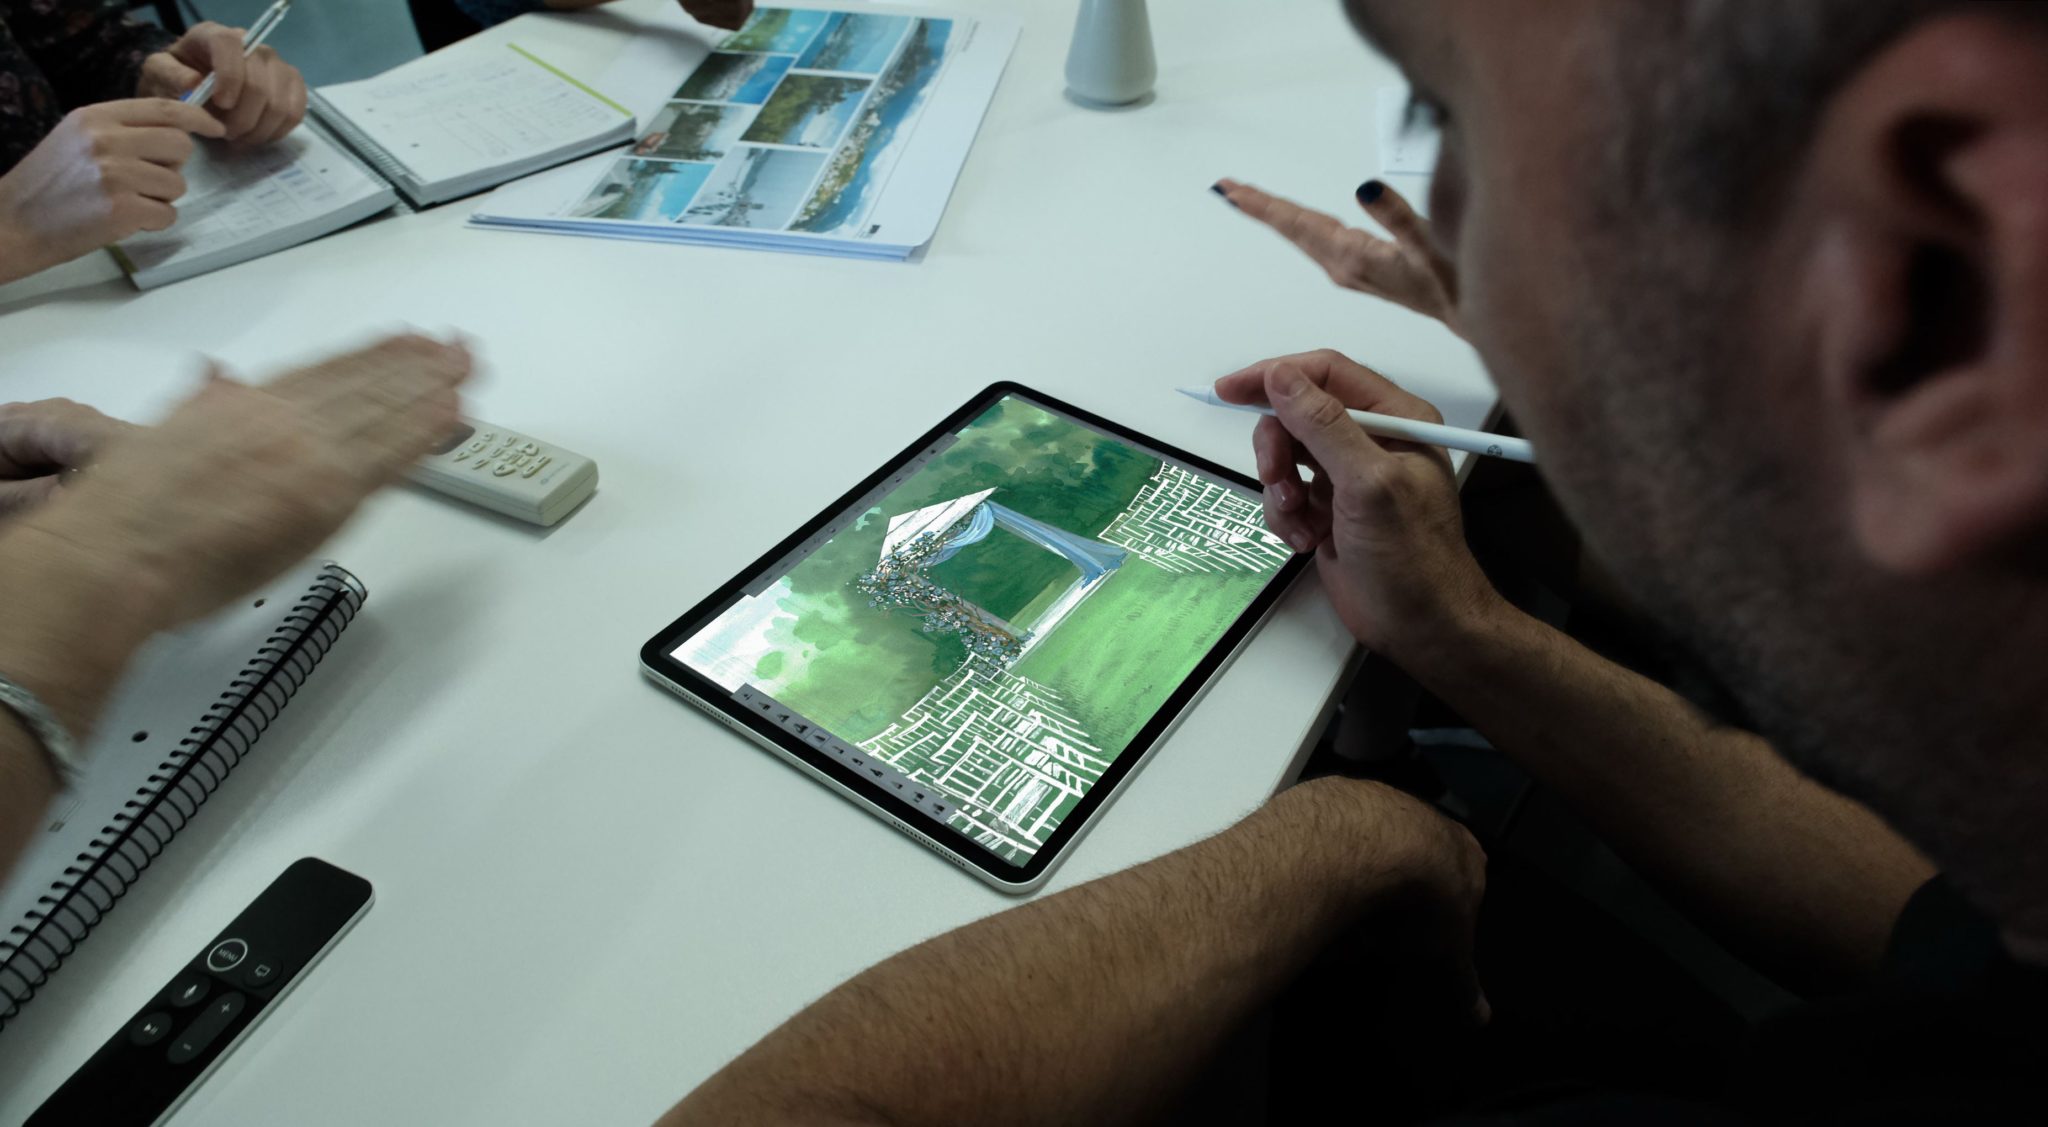 A person at a desk creating concept art on a tablet